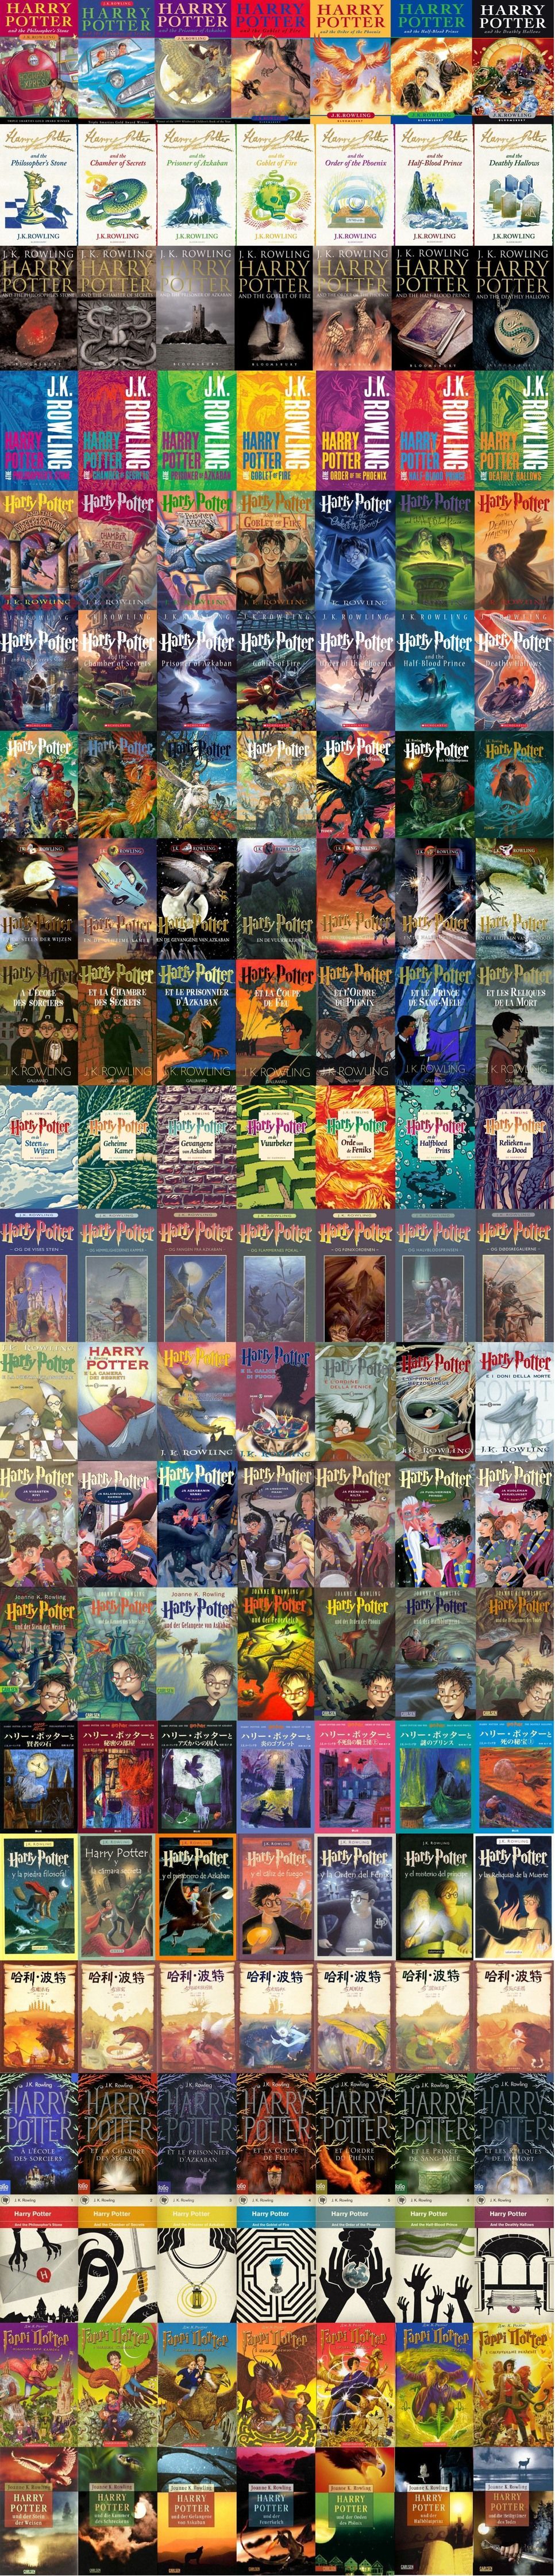 21 Harry Potter covers from around the world. Im sorry what?? I wan